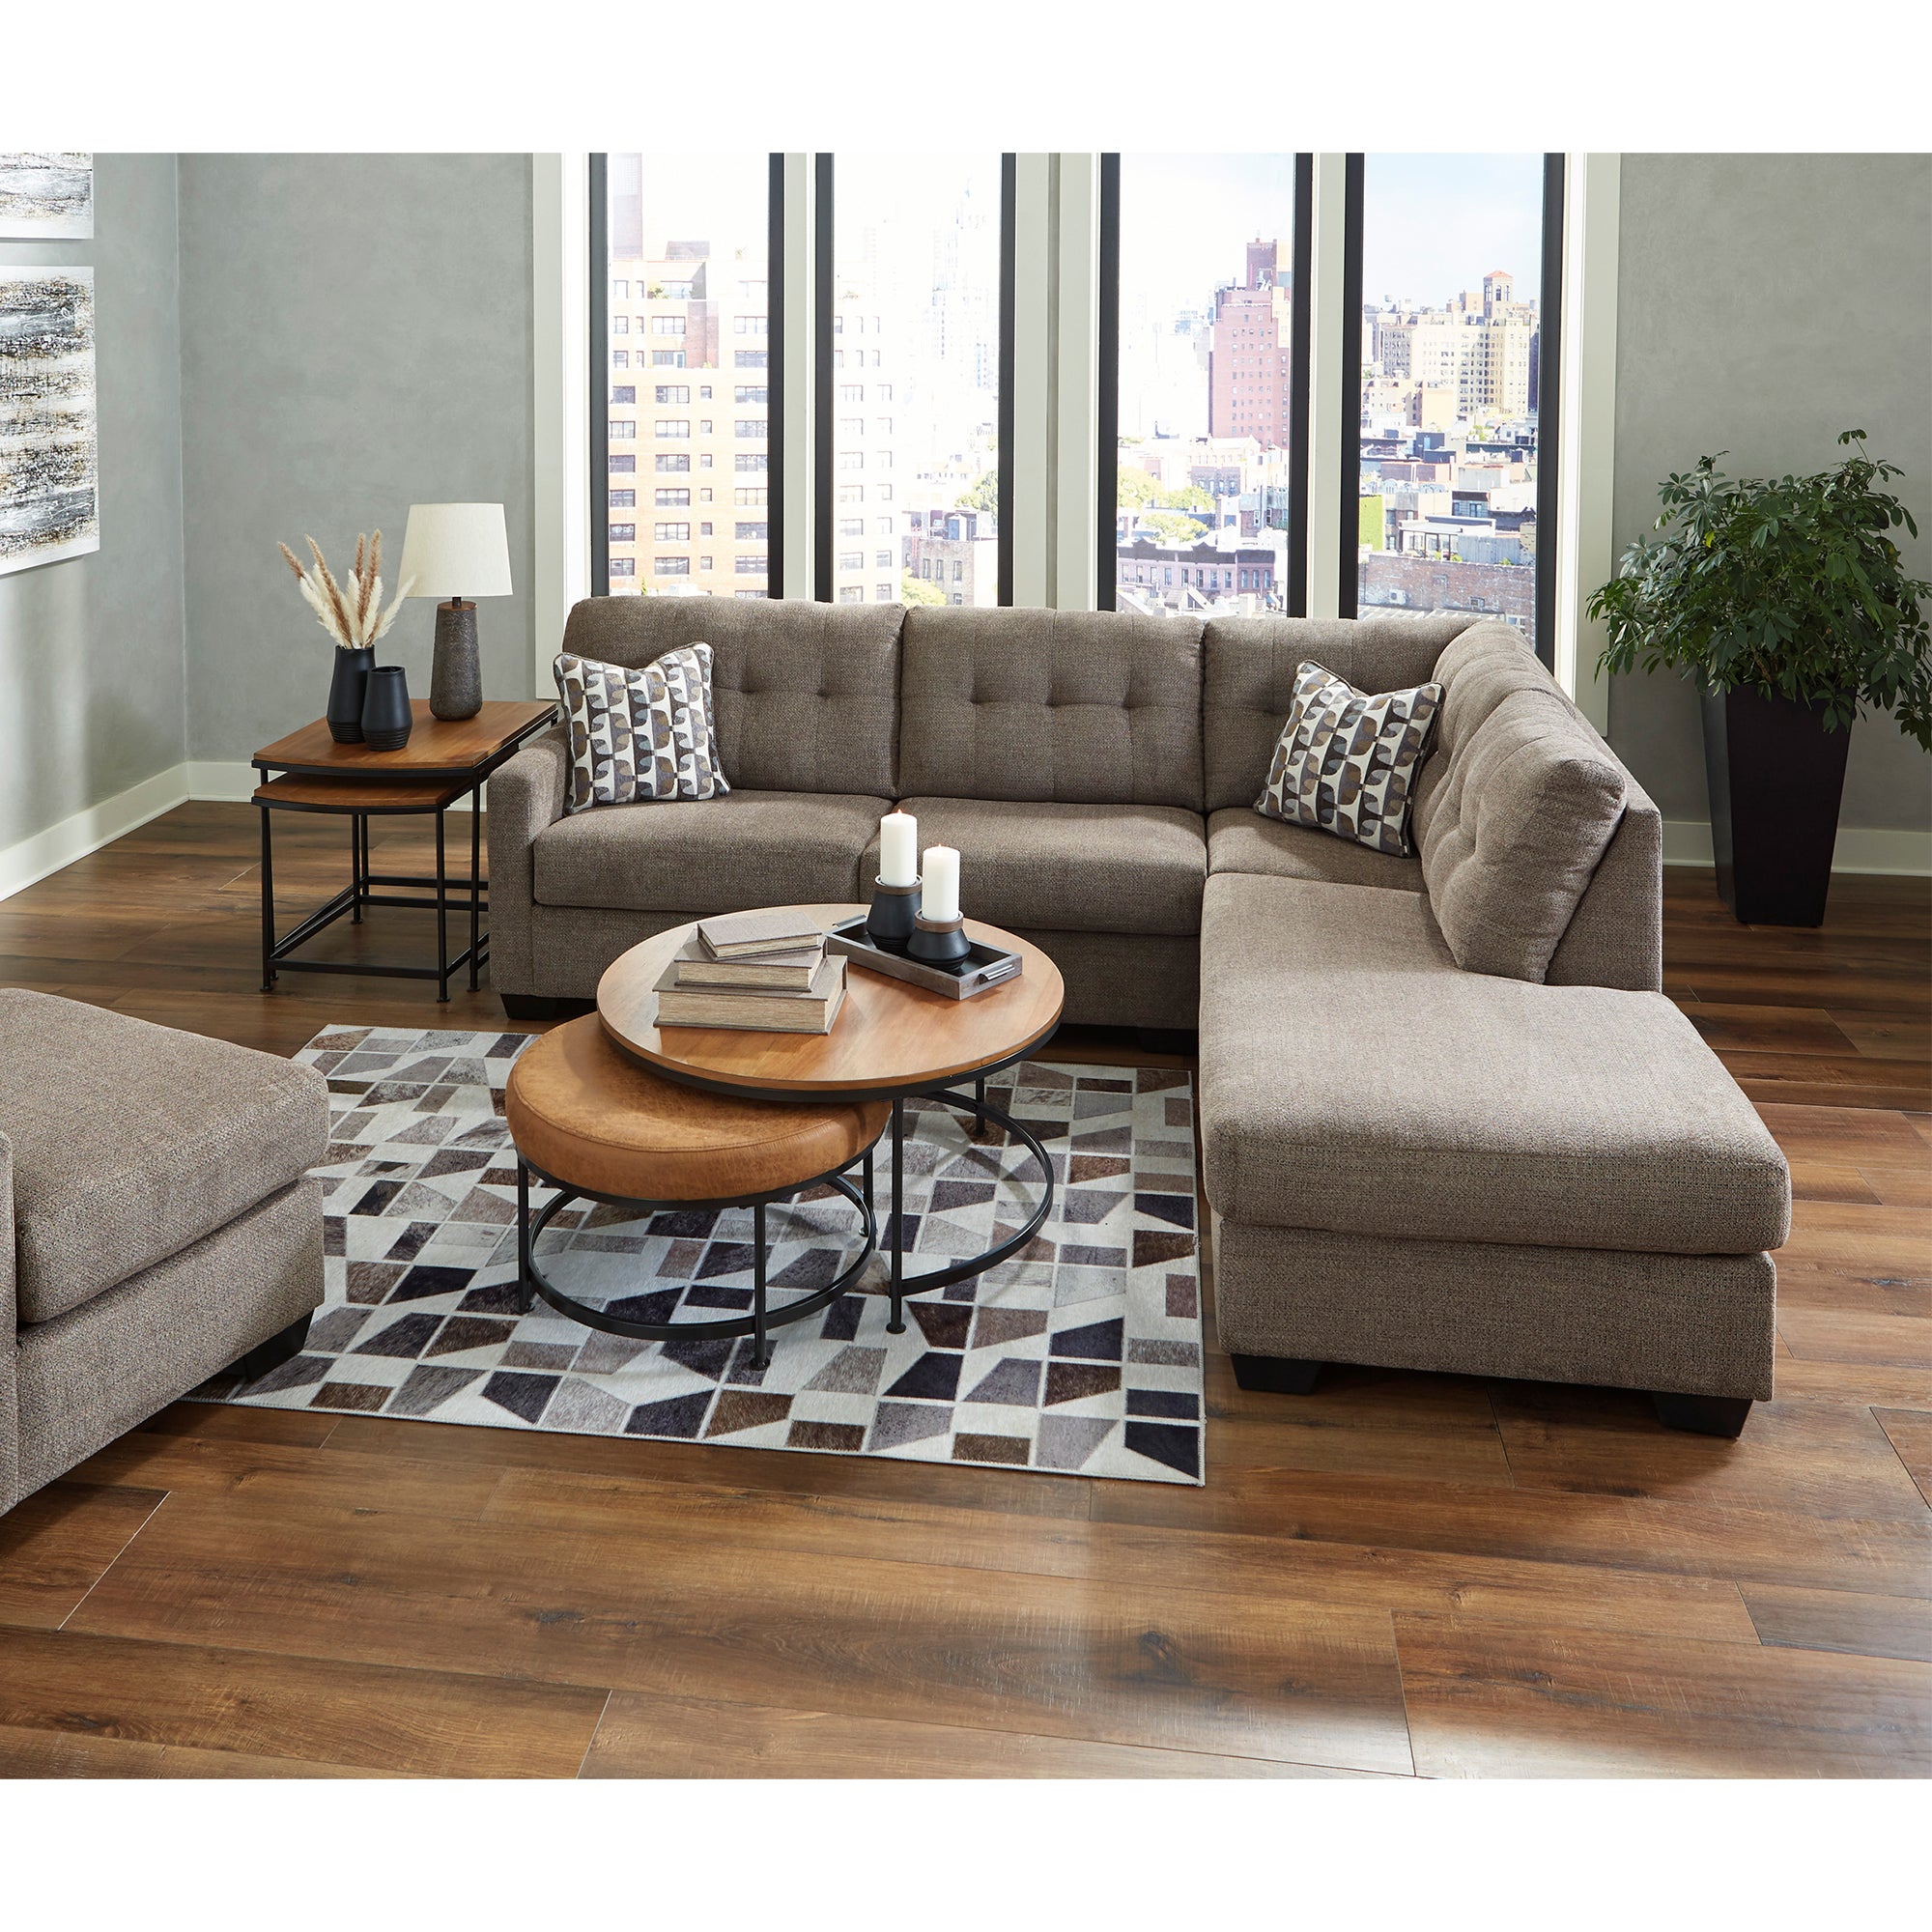 Functional yet fashionable Mahoney Sectional in chocolate, offers versatile seating options